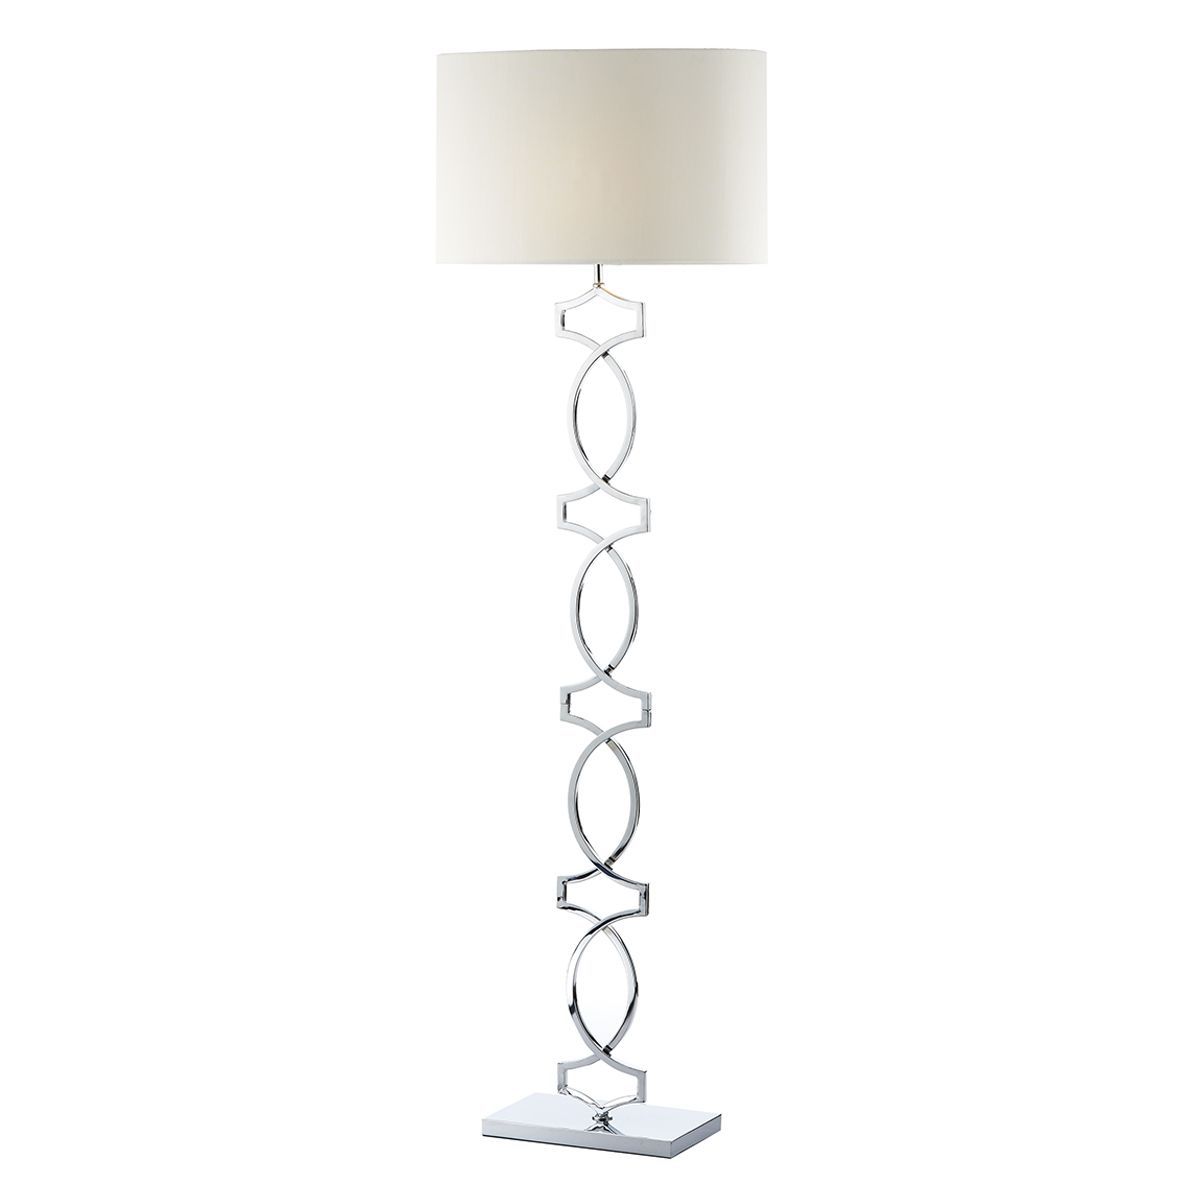 Donovan Floor Lamp Polished Chrome Complete With Shade In Chrome Floor Lamps (View 5 of 15)